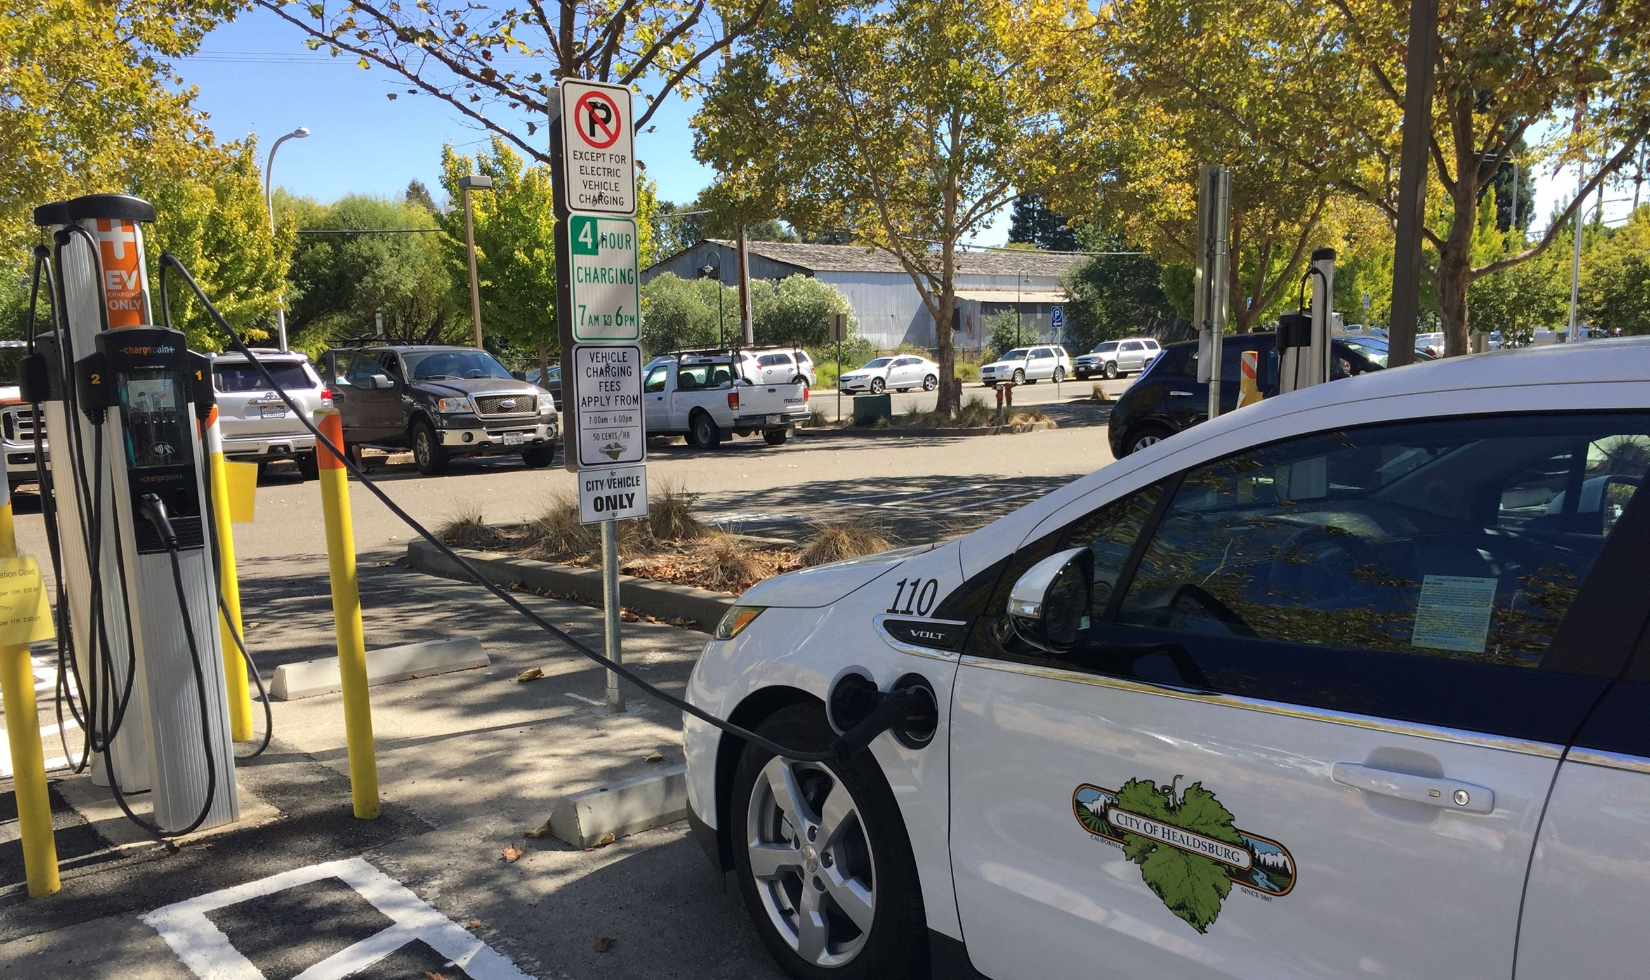 electric car plugged into charger in healdsburg public parking lot